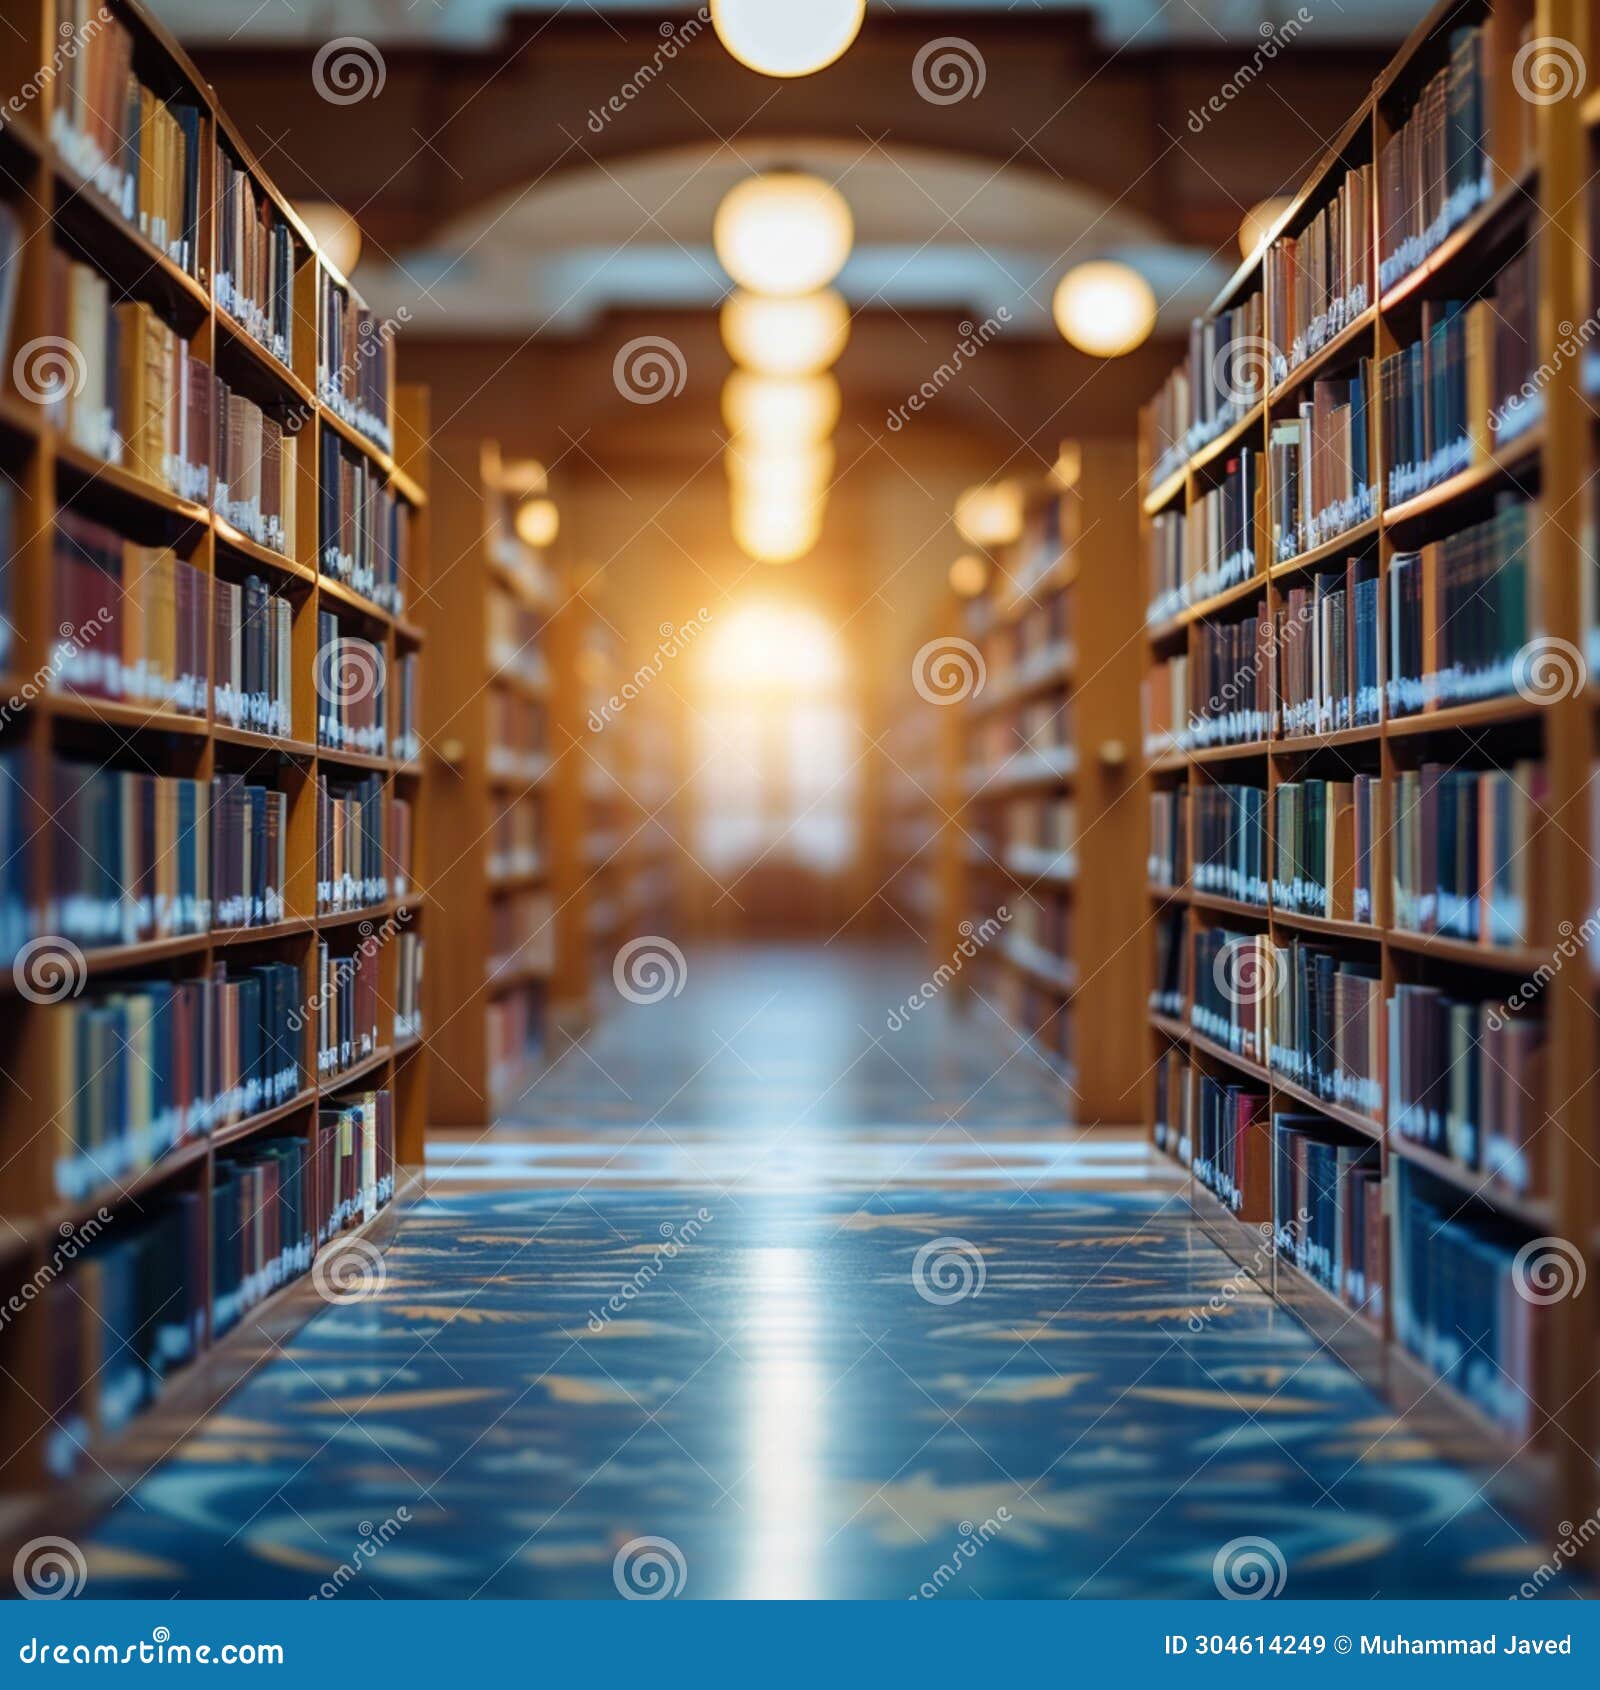 literary ambiance abstract blur of a public librarys tranquil space